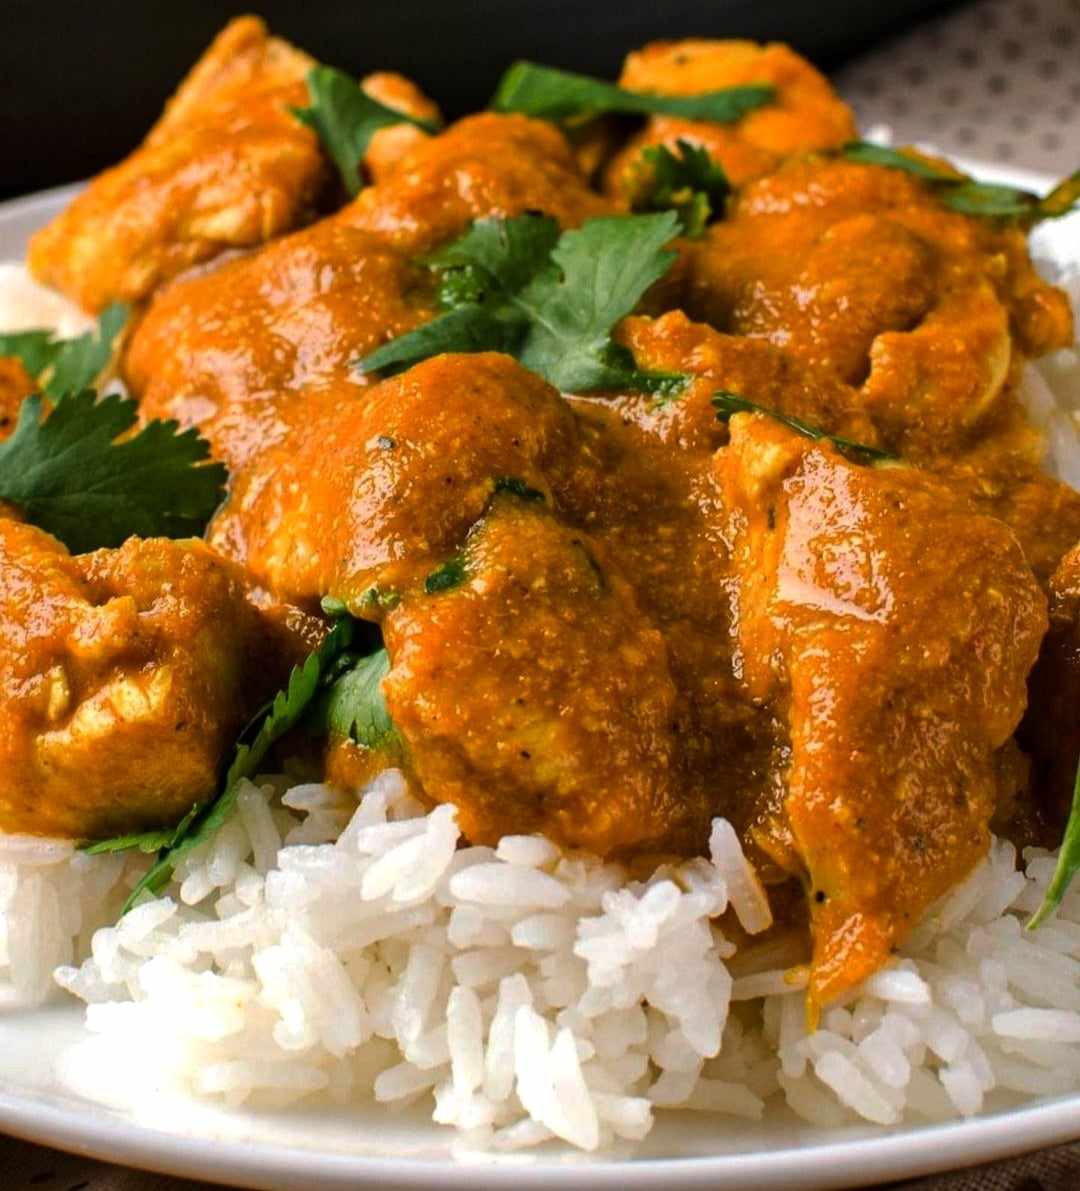 Chicken Korma Recipe Another one of my favourite dinners to make and eat it's also super low syn for a super tasty meal!